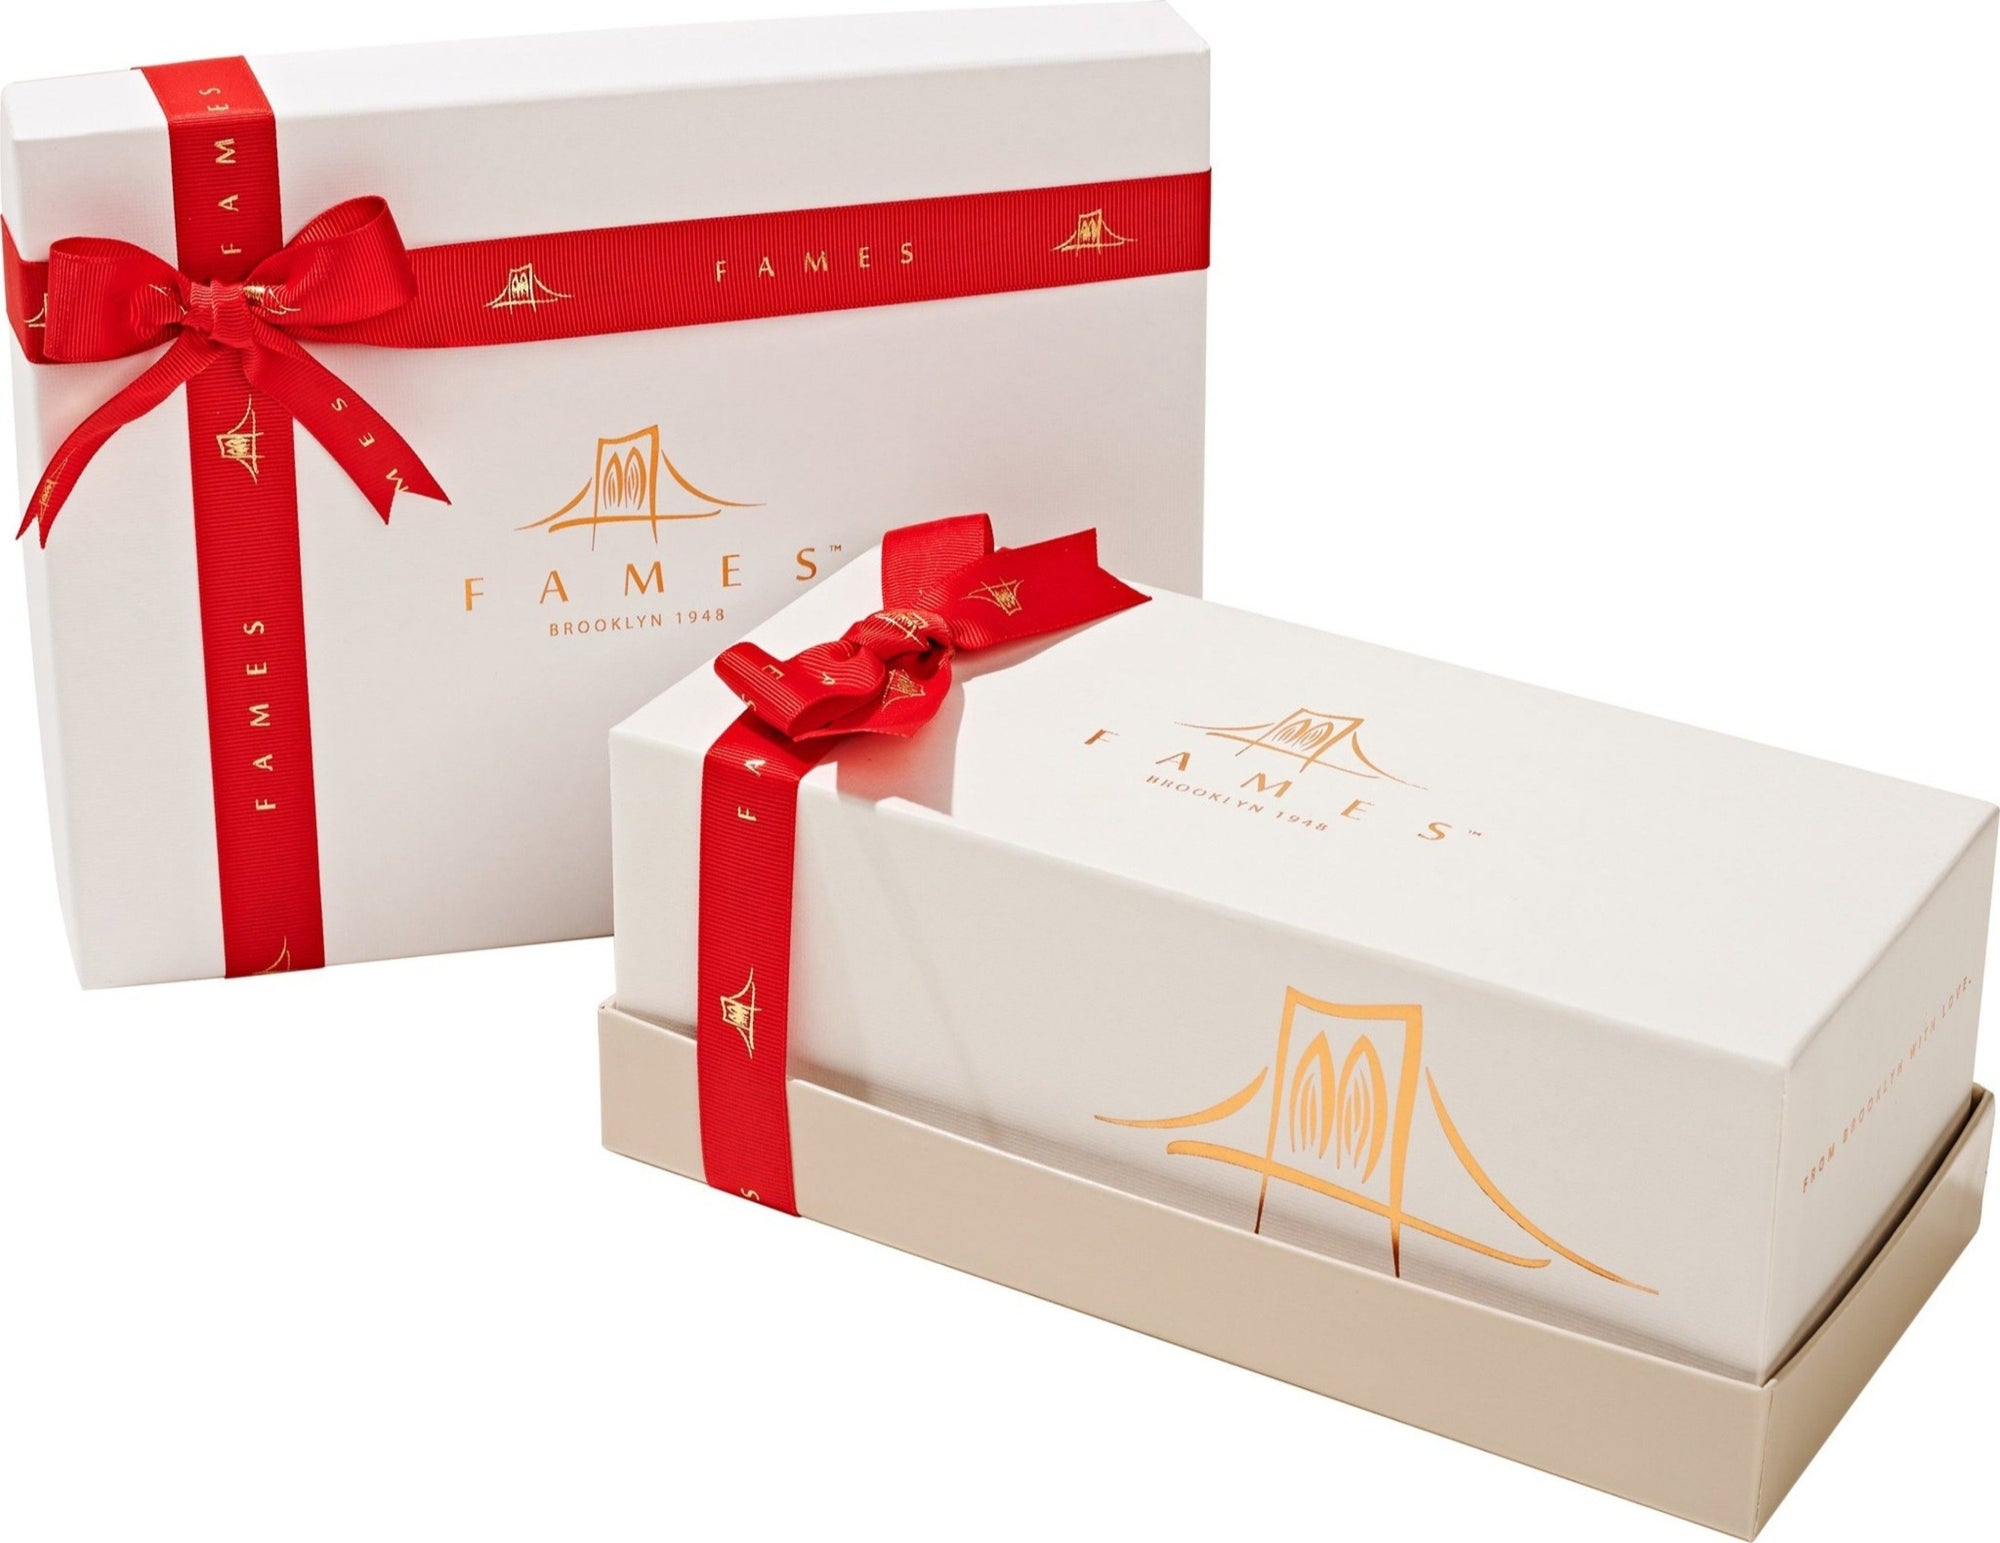 Holiday Chocolate Gift Set, Fancy chocolate Gift Box With Chocolate Lo -  Fames Chocolate